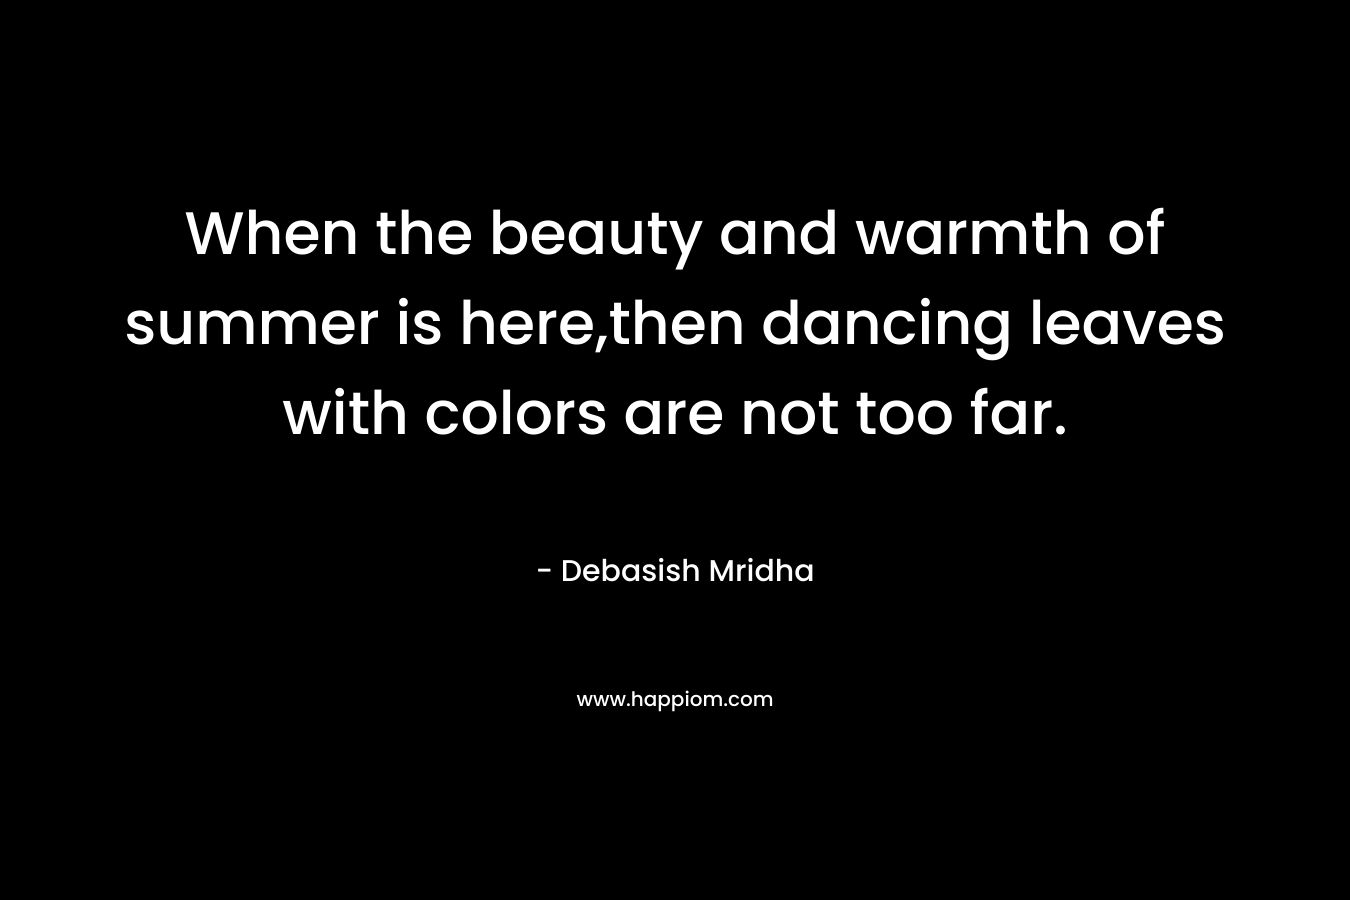 When the beauty and warmth of summer is here,then dancing leaves with colors are not too far.